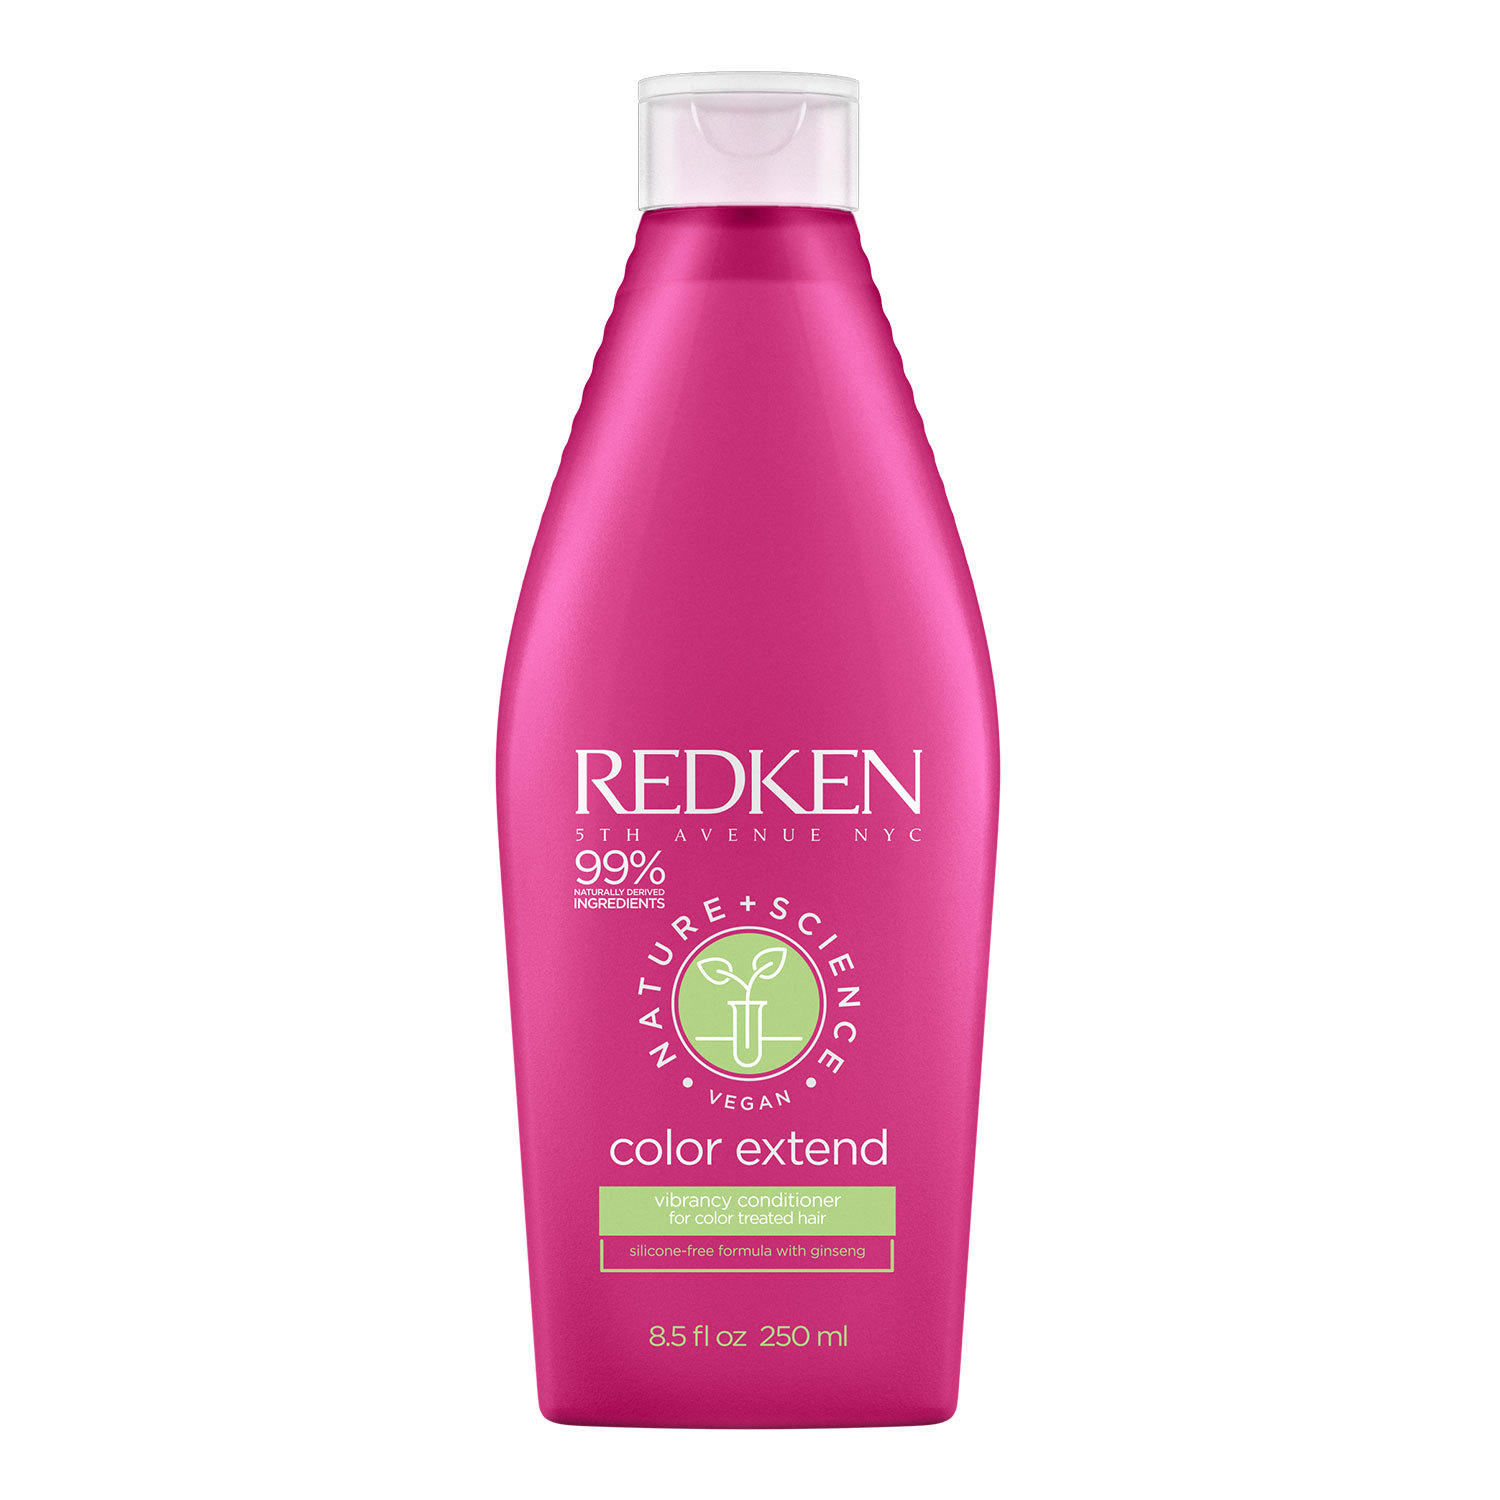 Retina e126bd9f7a8536d8c27b a9a489b3931c9f817b21 redken 2018 nature science color extend retail conditioner na rgb